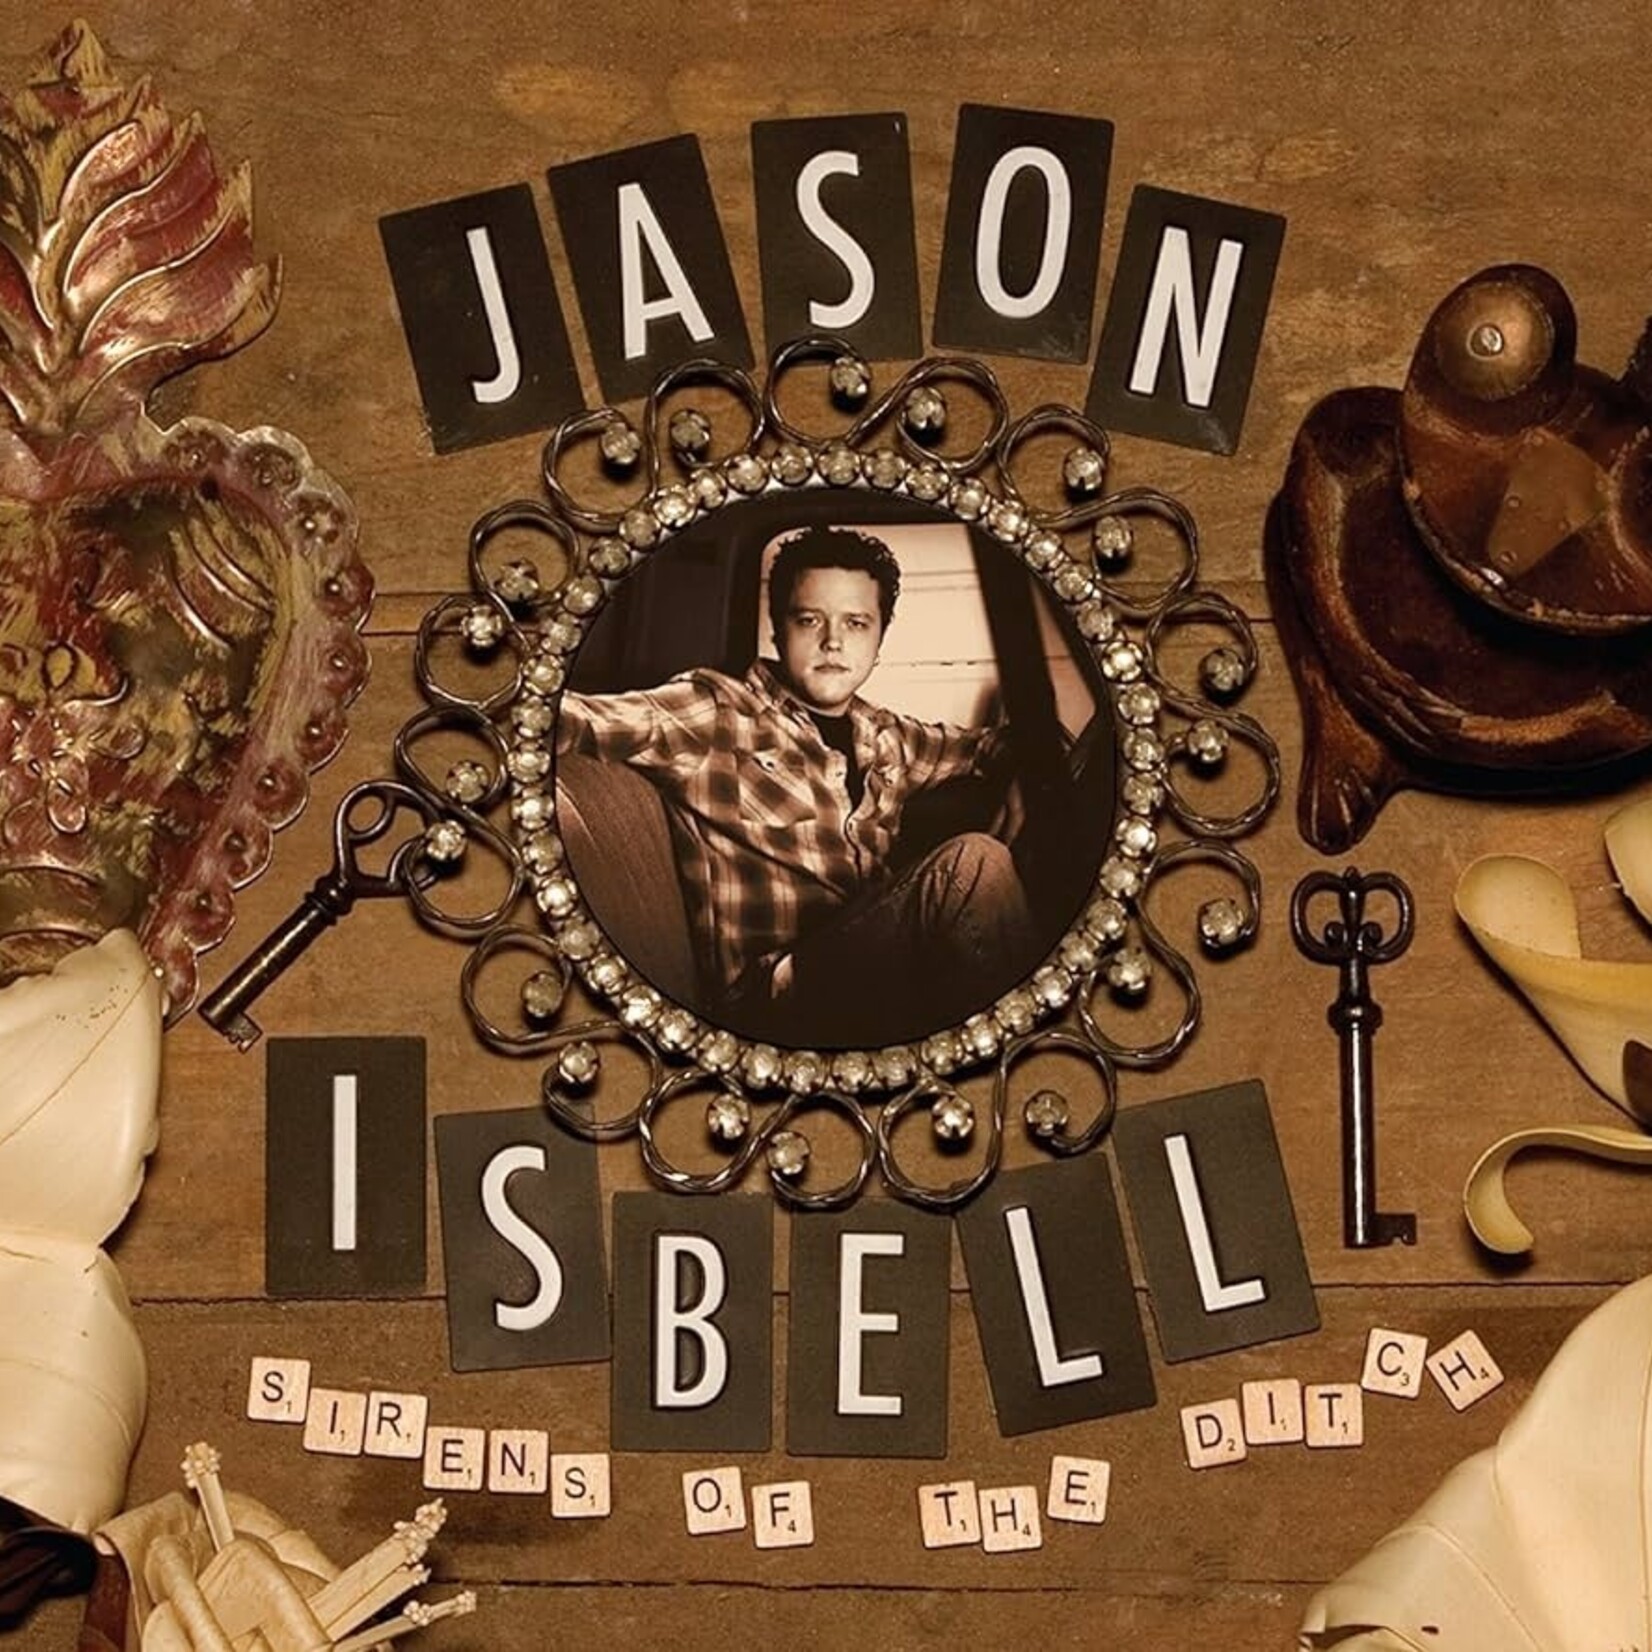 Jason Isbell – Sirens Of The Ditch